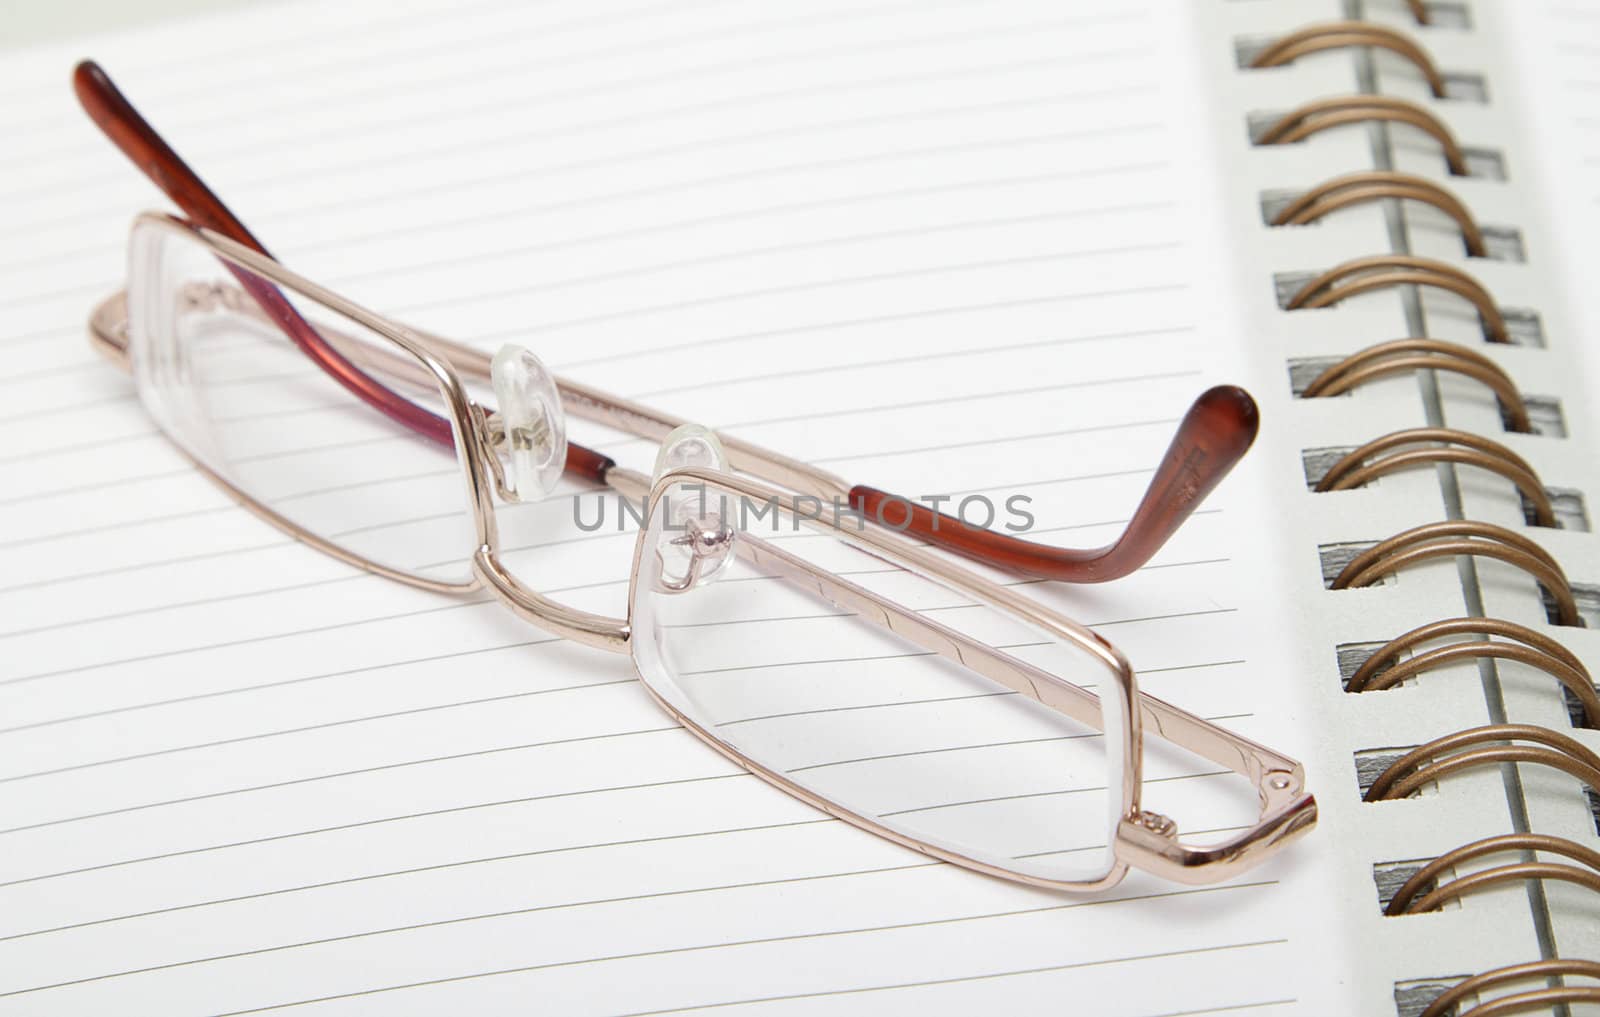 Ruled diary and a pair of reading glasses